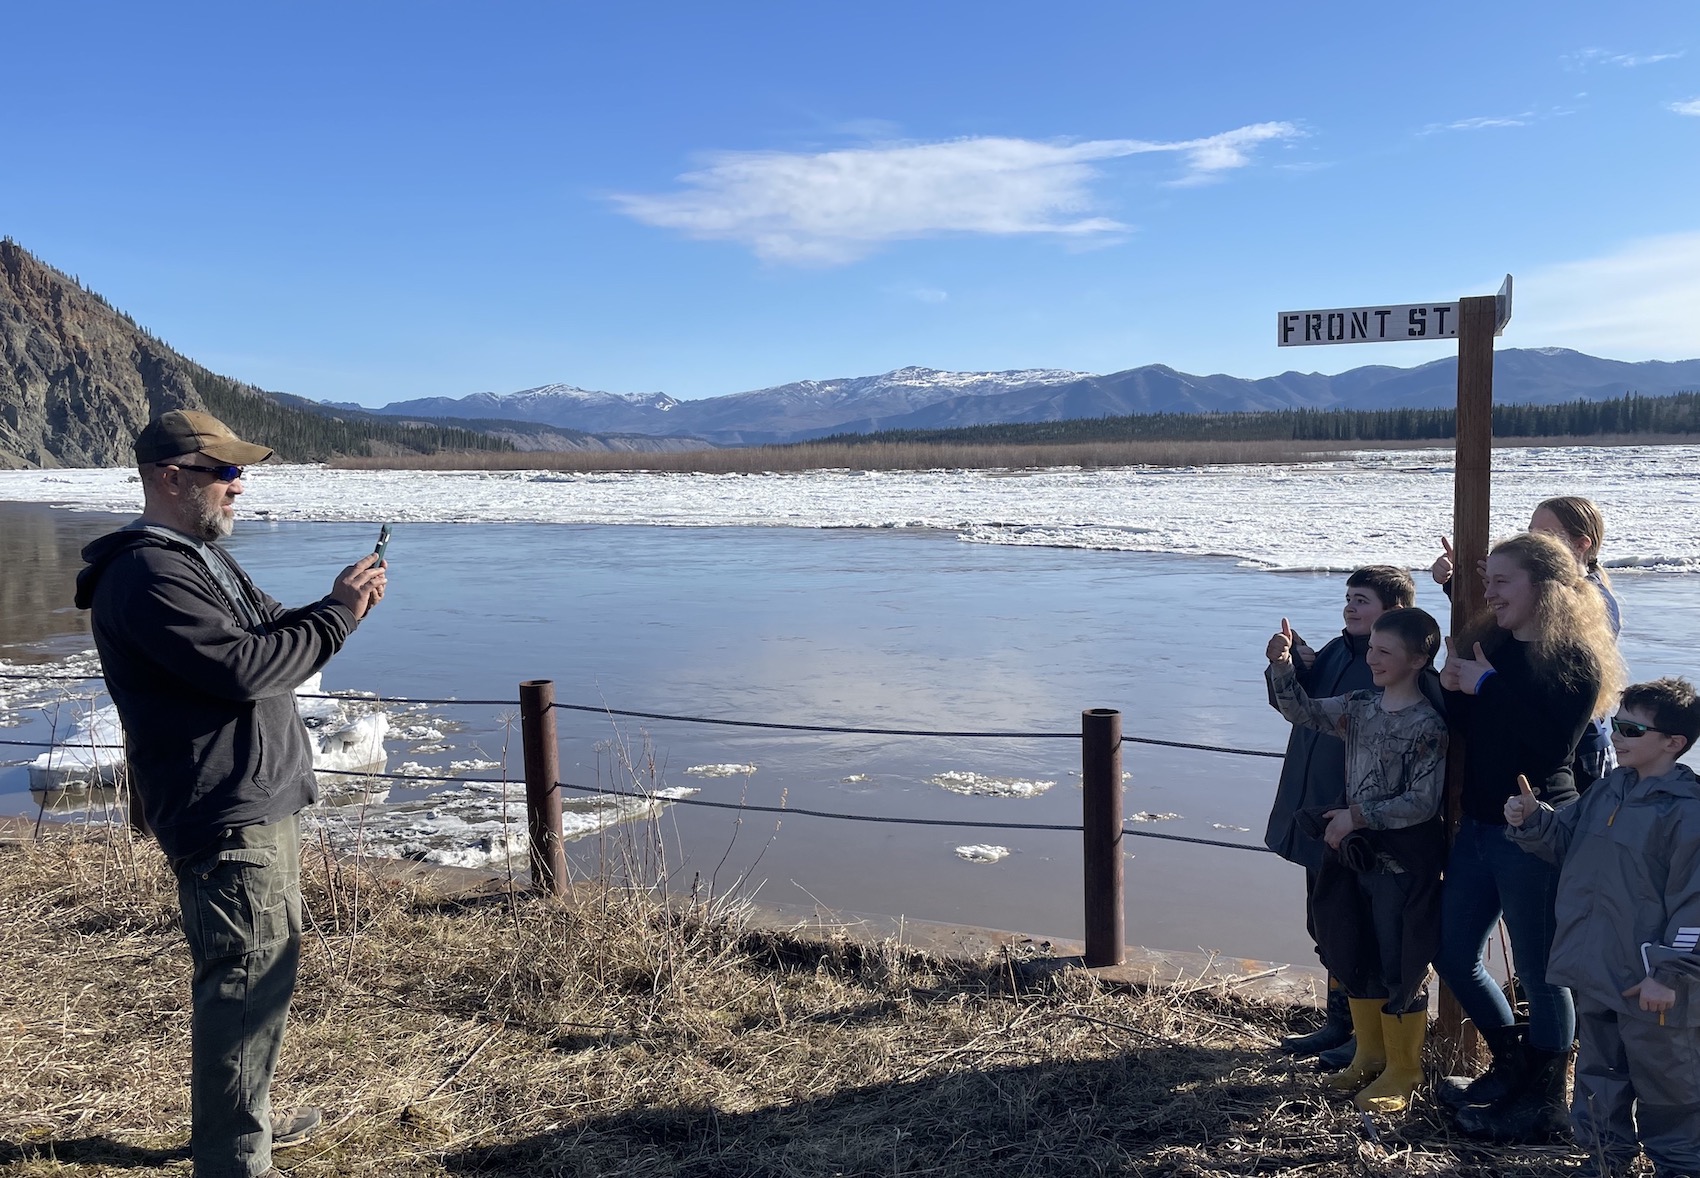 A man, at left, uses a cell phone to take a photo of a group of children gathered at right. Behind them, a river runs partially full of ice.